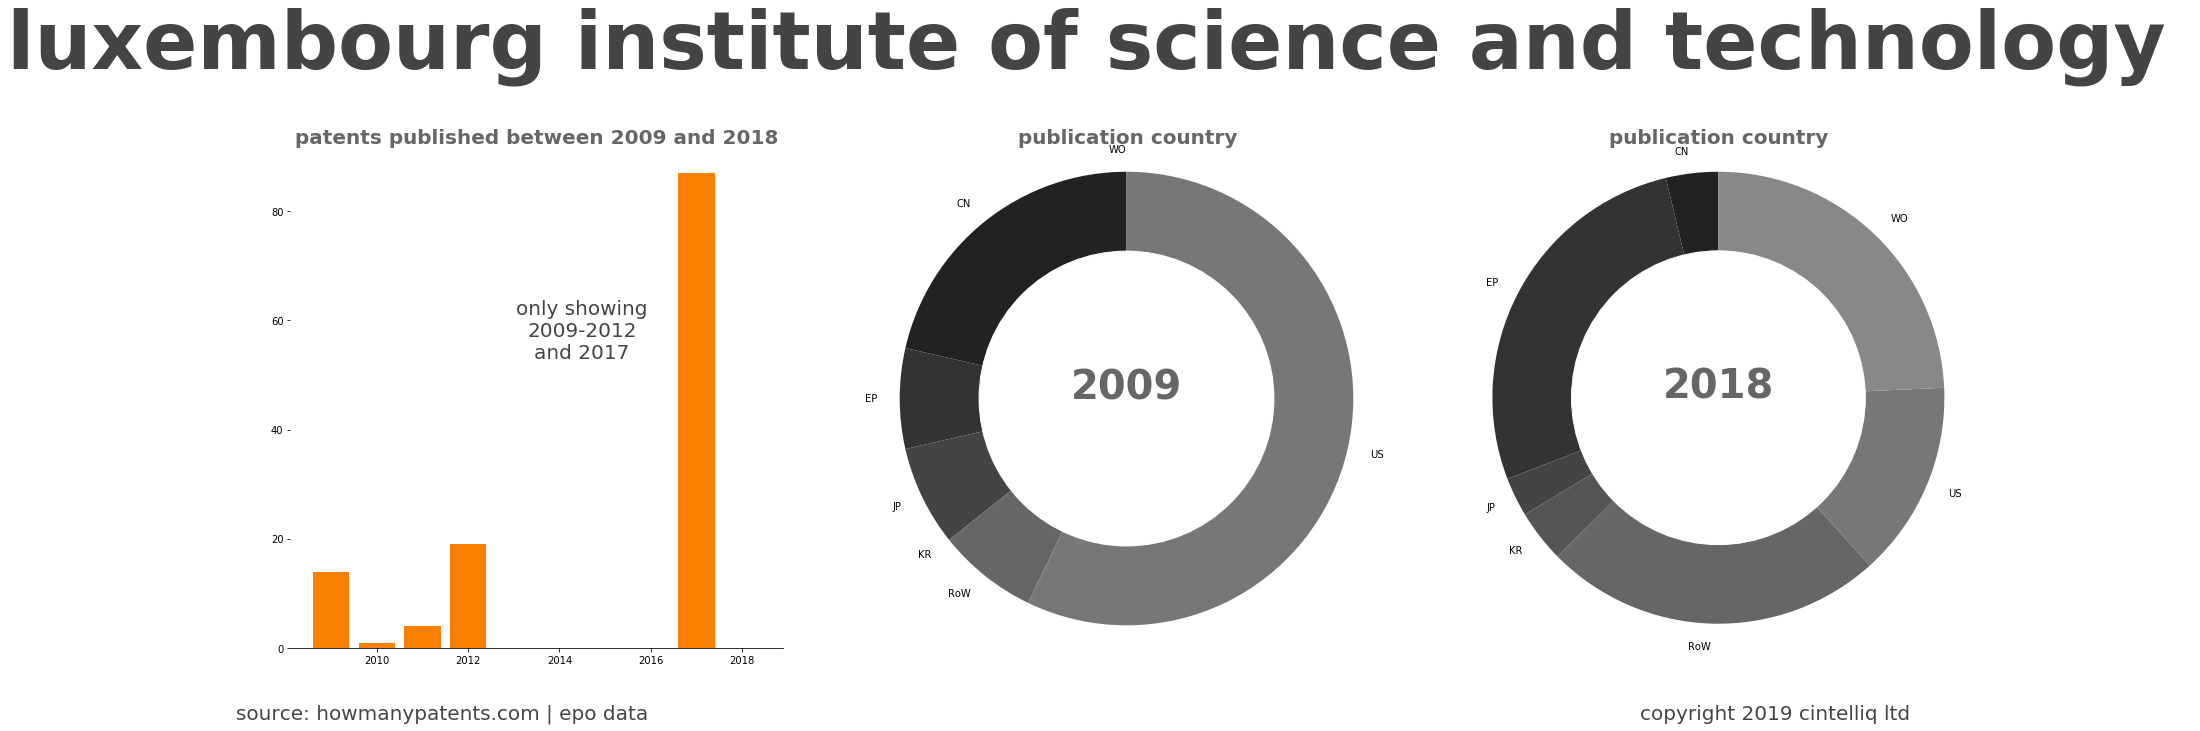 summary of patents for Luxembourg Institute Of Science And Technology 